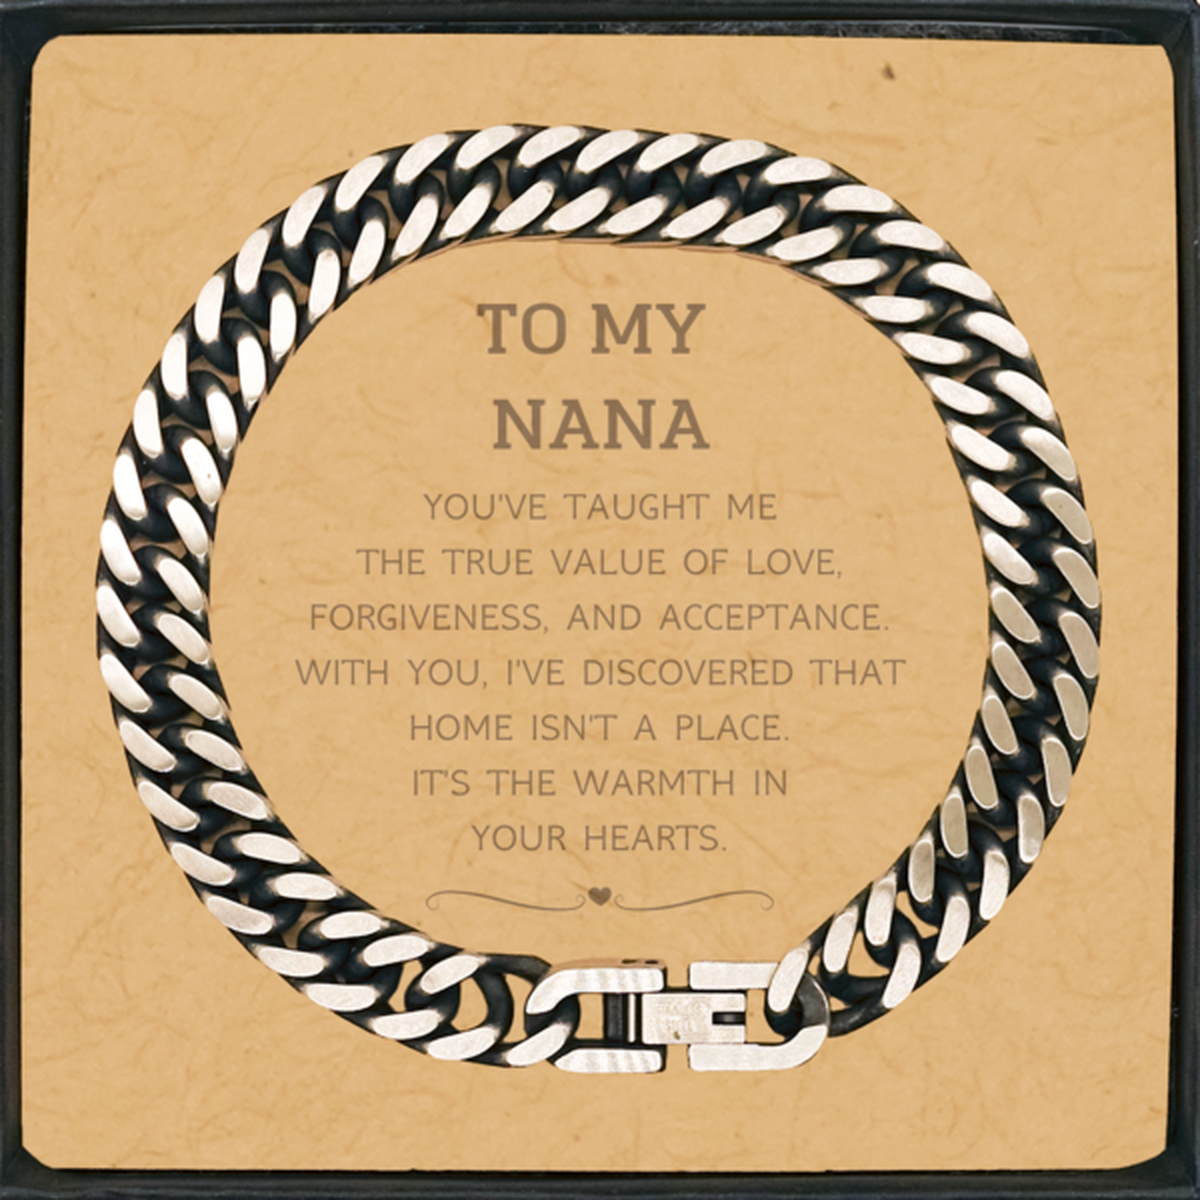 To My Nana Gifts, You've taught me the true value of love, Thank You Gifts For Nana, Birthday Cuban Link Chain Bracelet For Nana